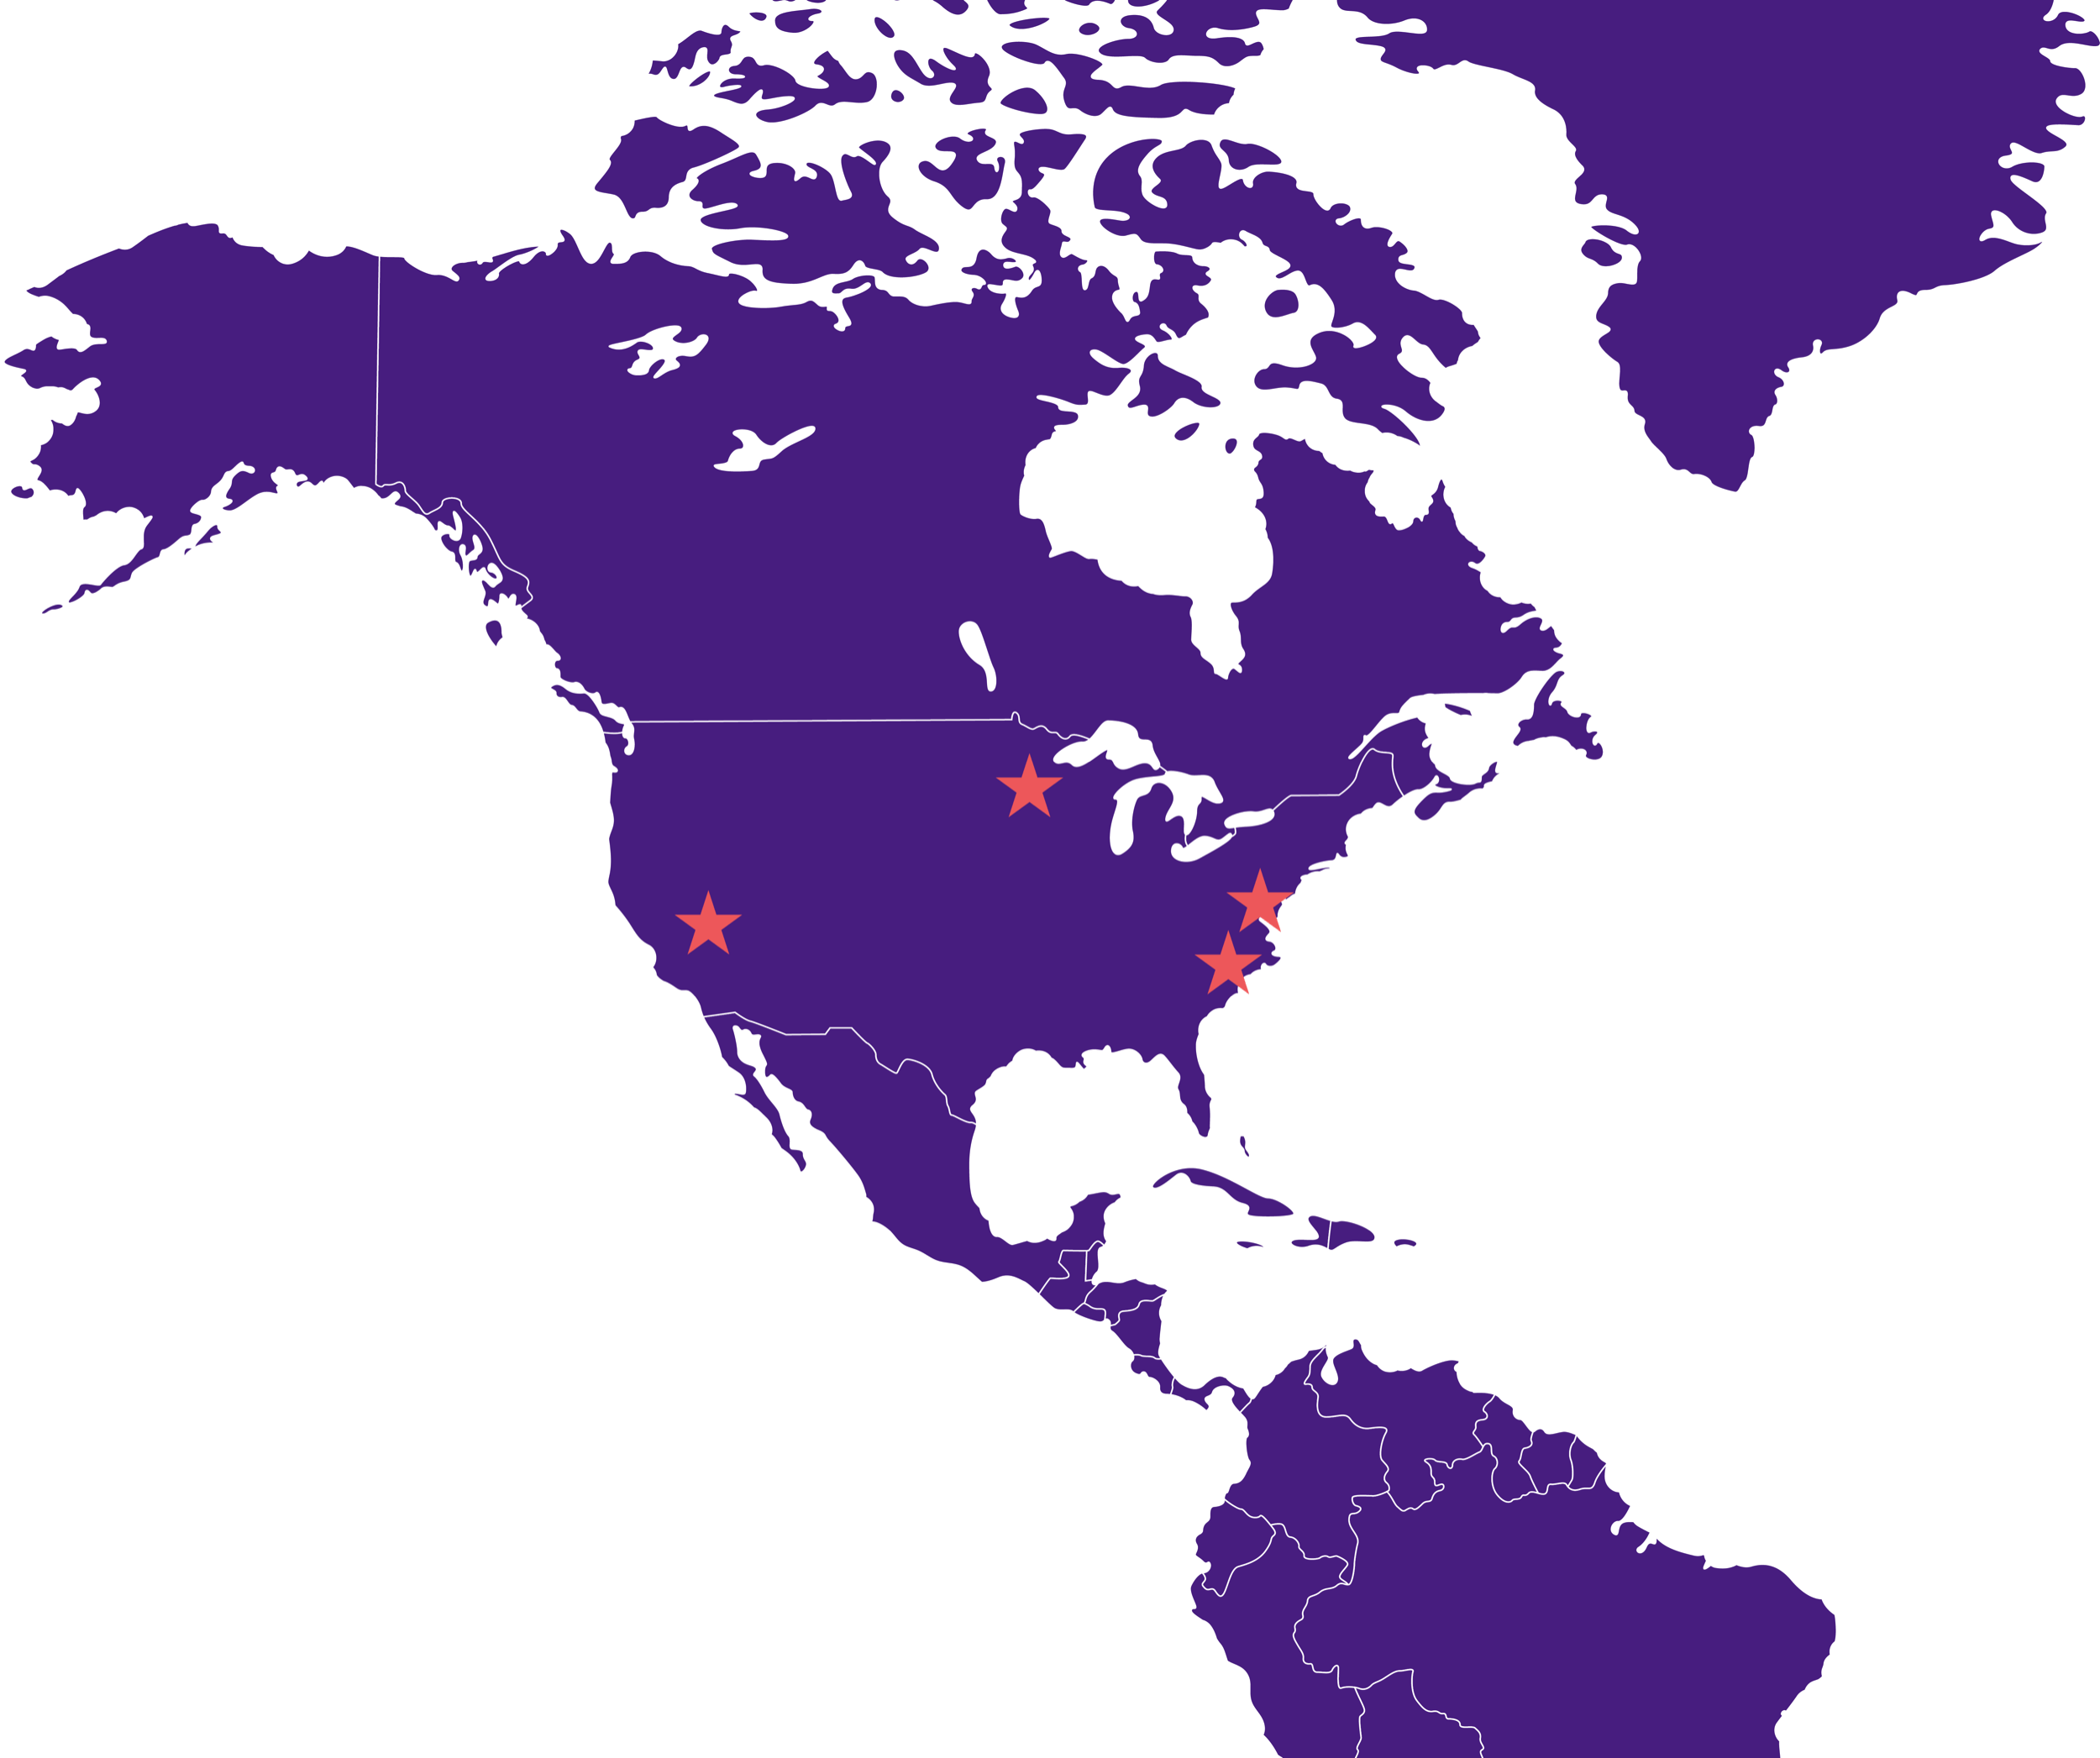 Map showing the STAR locations across North America